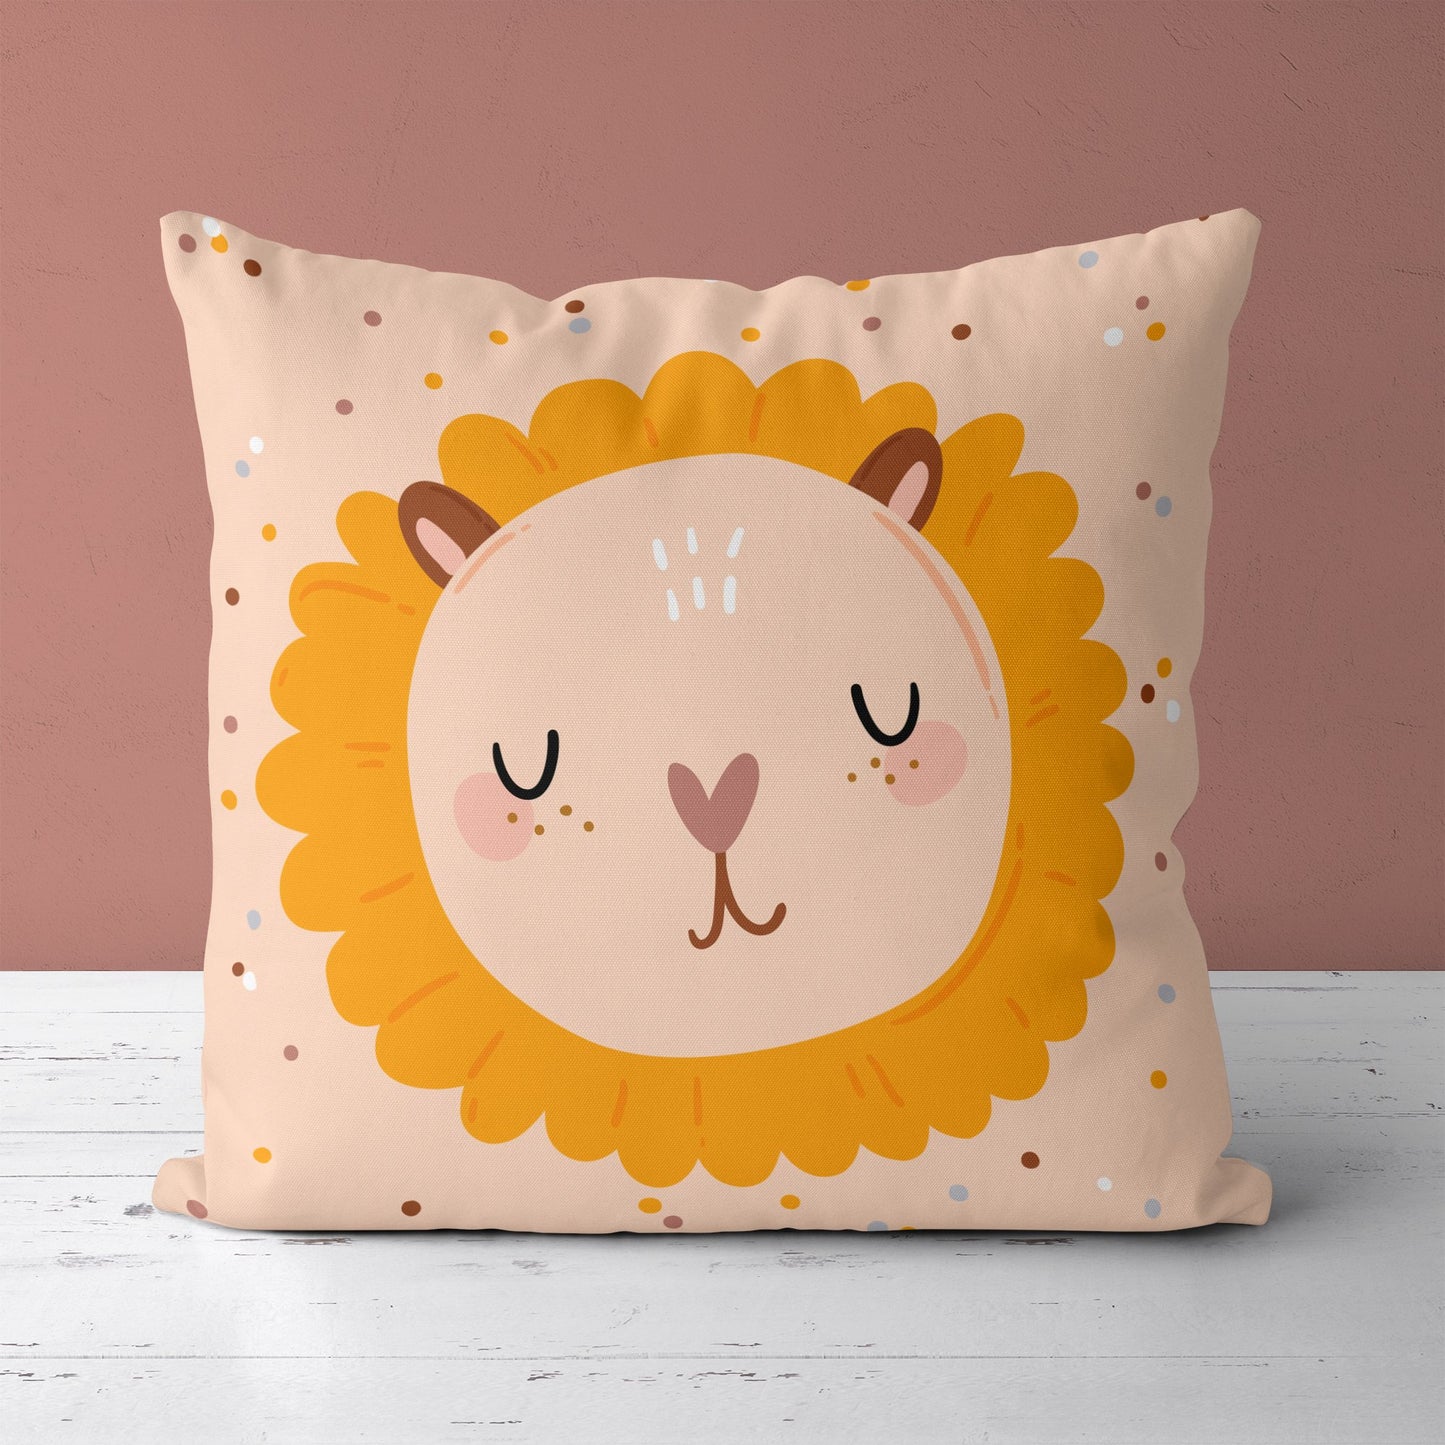 Throw Pillow with Cute Lion